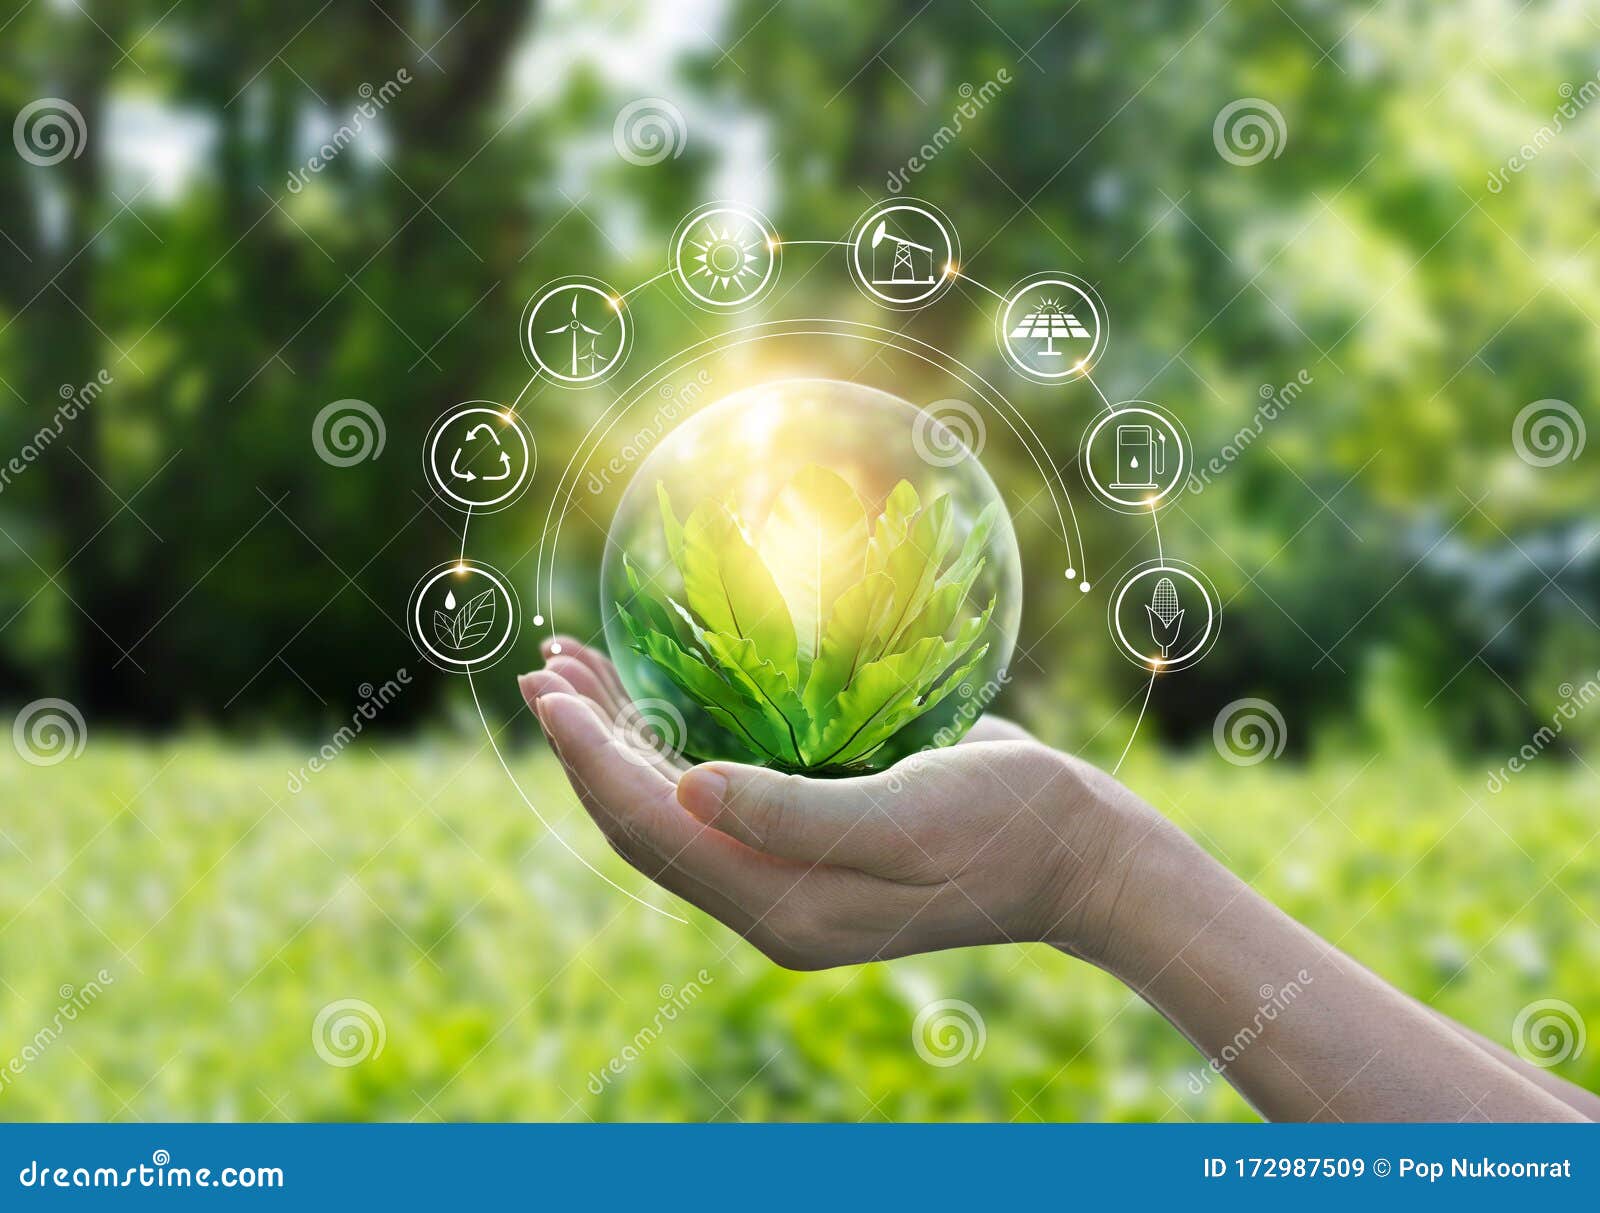 hands protecting globe of green tree on tropical nature summer background, ecology and environment concept